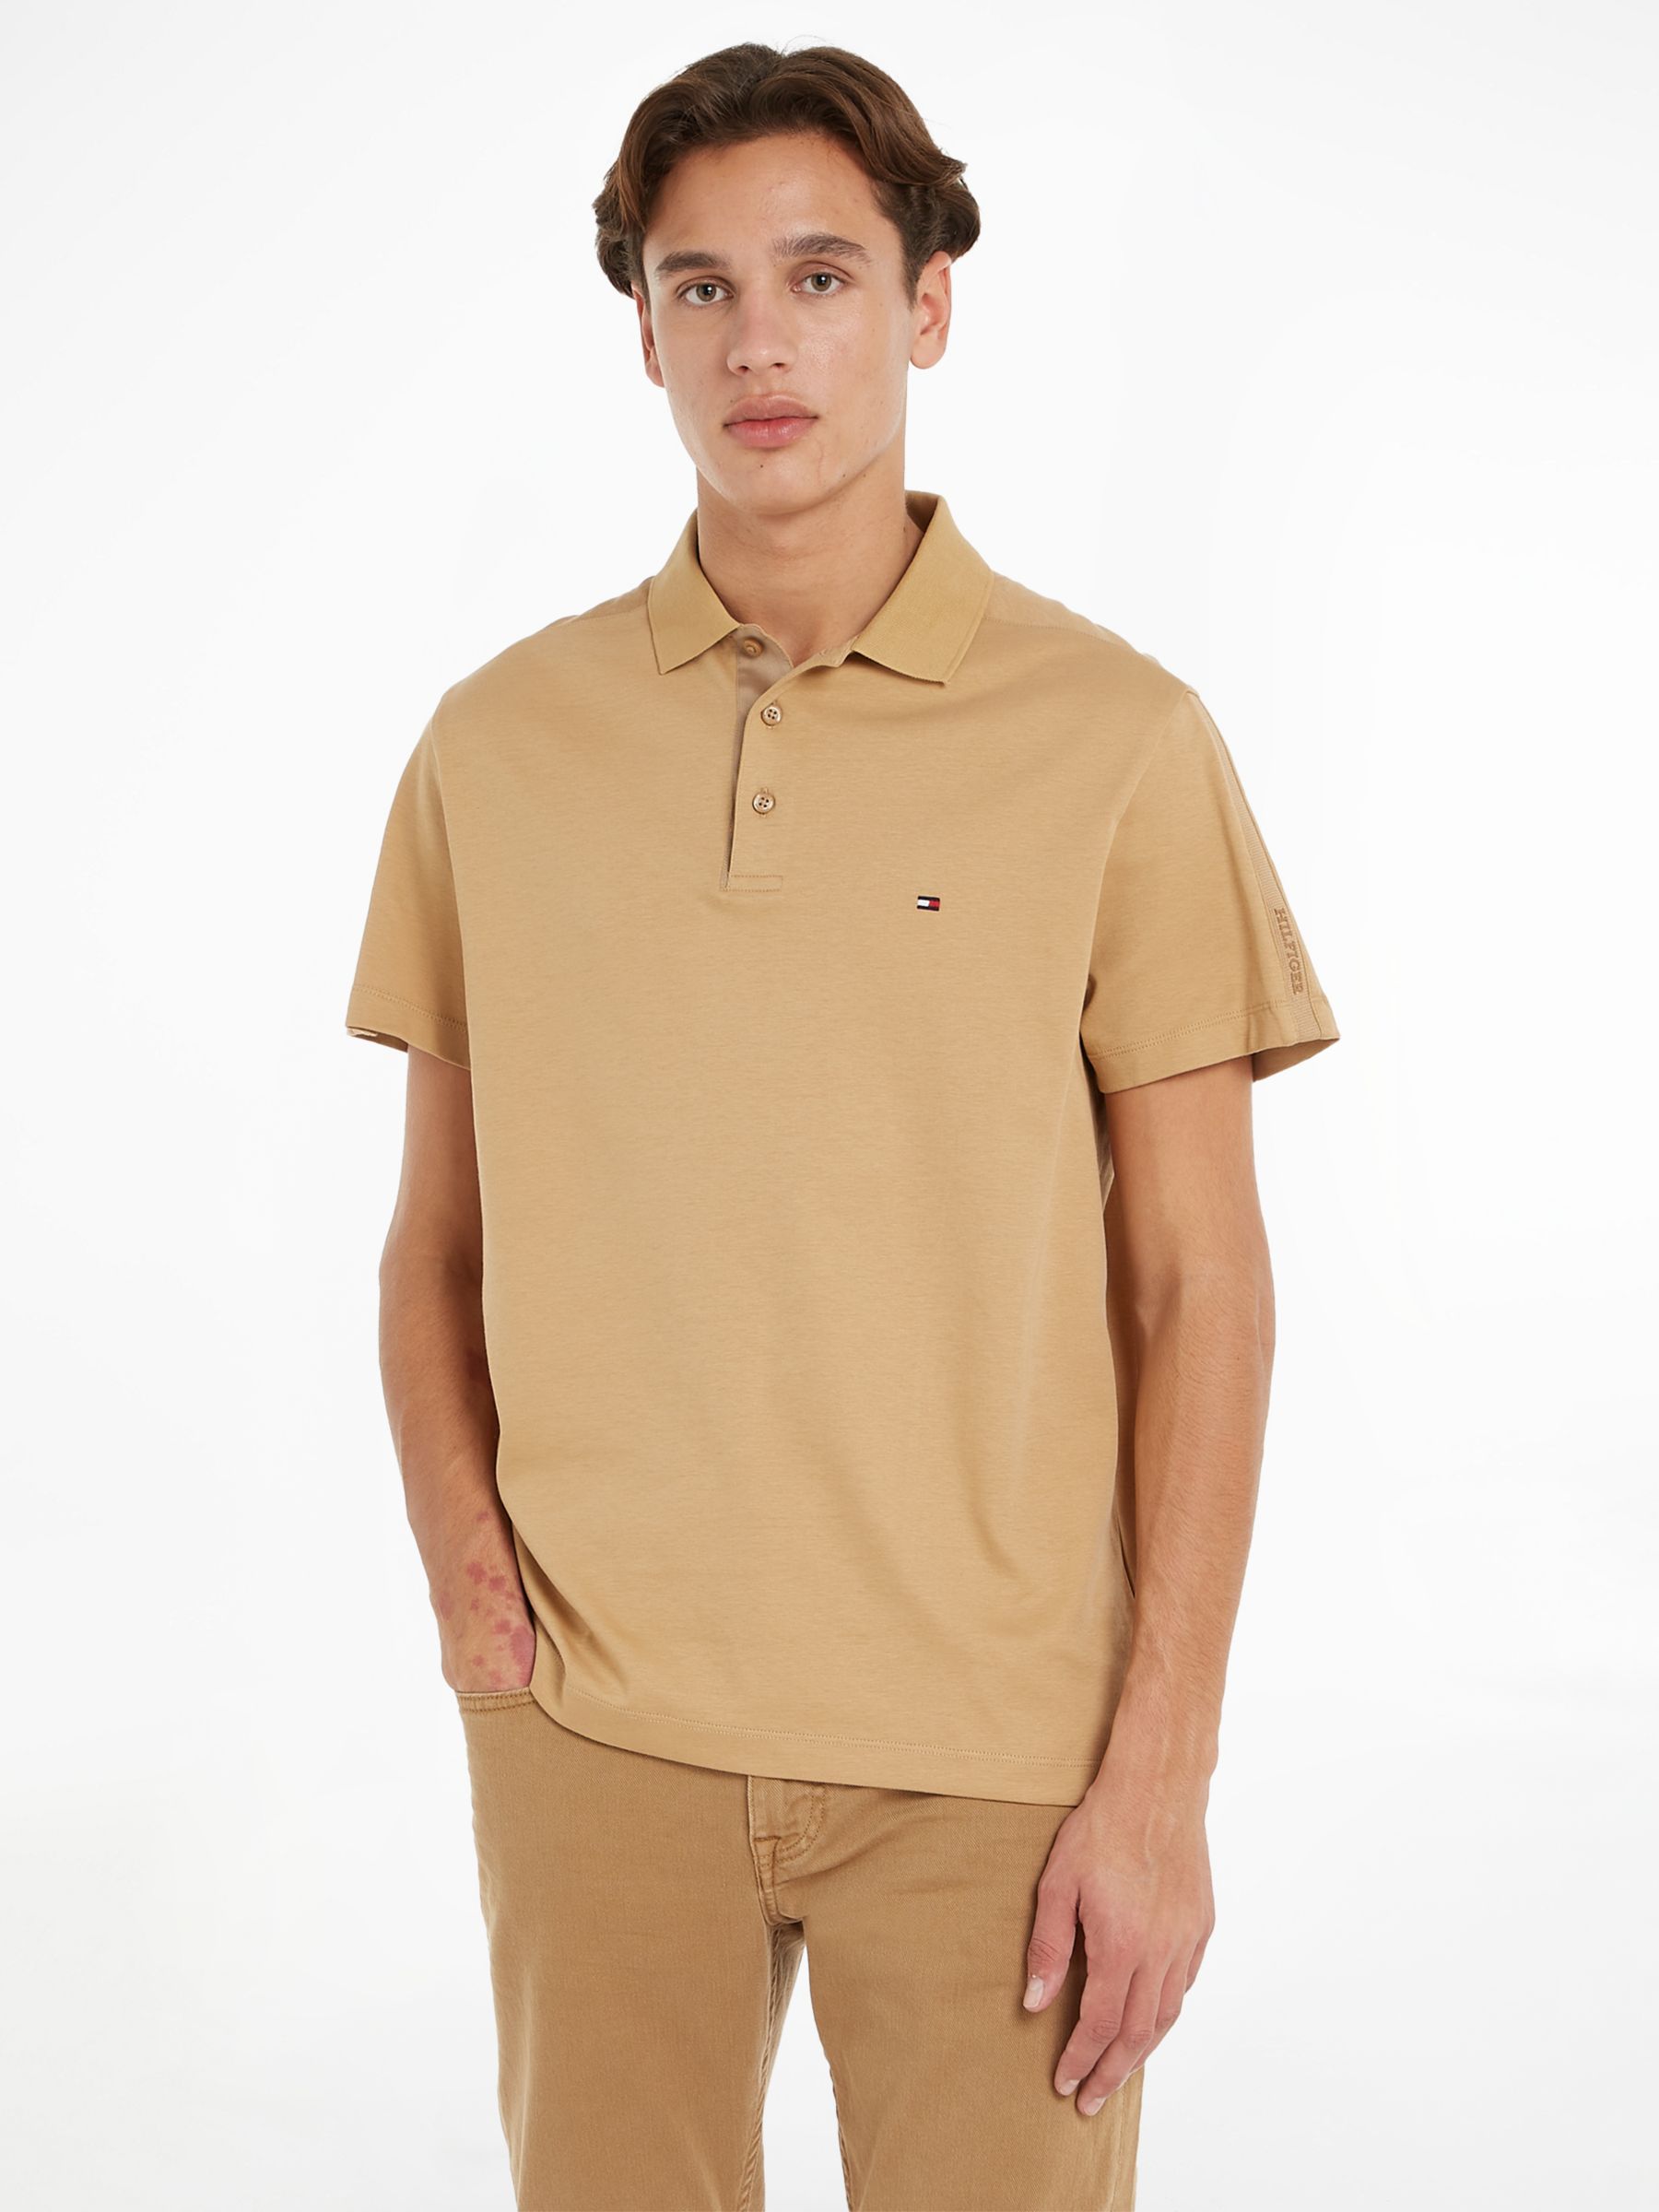 Tommy Hilfiger 1985 Slim Fit Polo Shirt, Peach Dusk at John Lewis & Partners